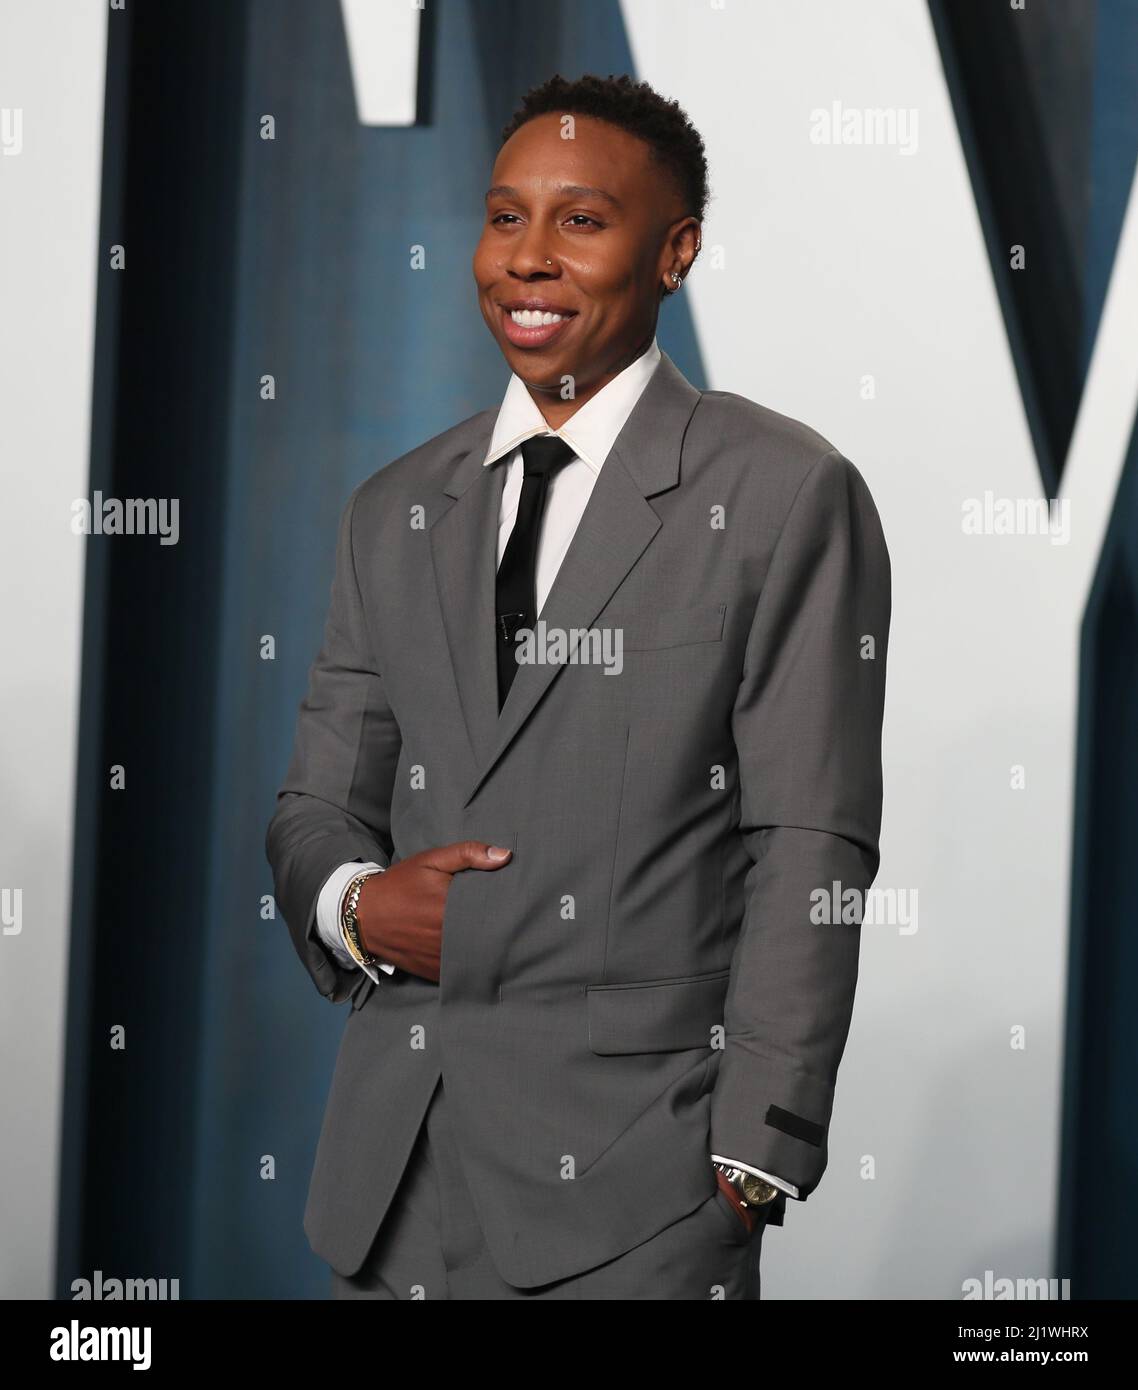 Lena Waithe arrives at the Vanity Fair Oscar party during the 94th Academy Awards in Beverly Hills, California, U.S., March 27, 2022.   REUTERS/Danny Moloshok Stock Photo